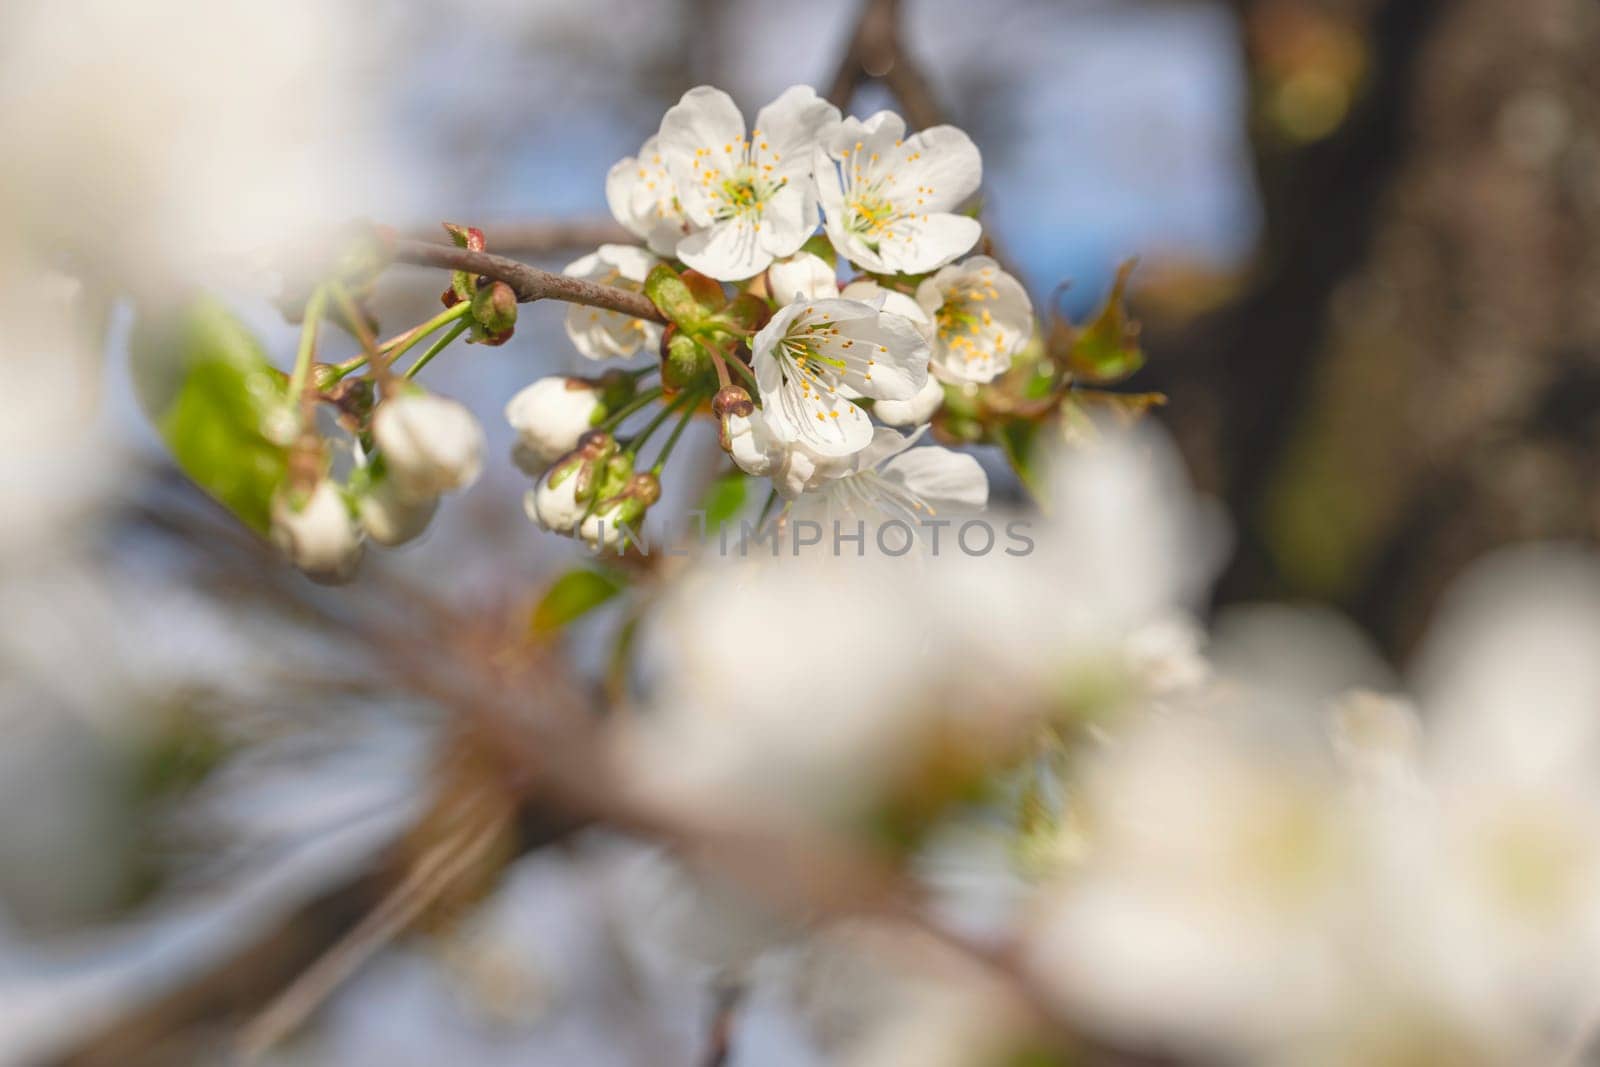 Blooming apple tree on a blurred natural background. Selective focus. Spring background with white flowers.